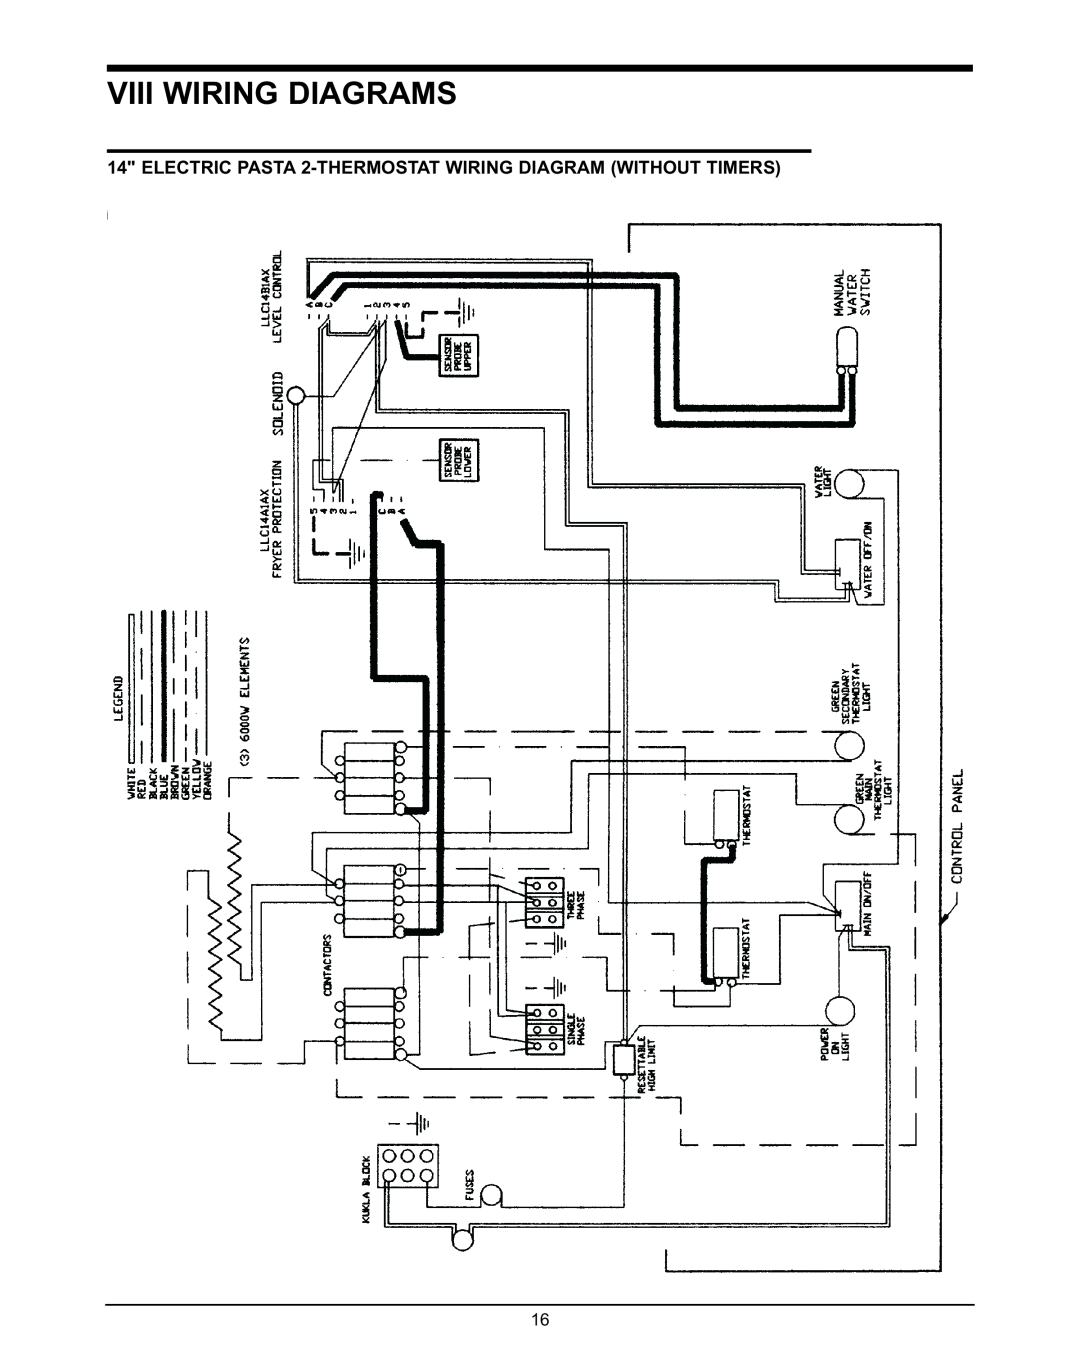 Keating Of Chicago 240V service manual Viii Wiring Diagrams, ELECTRIC PASTA 2-THERMOSTAT WIRING DIAGRAM WITHOUT TIMERS 